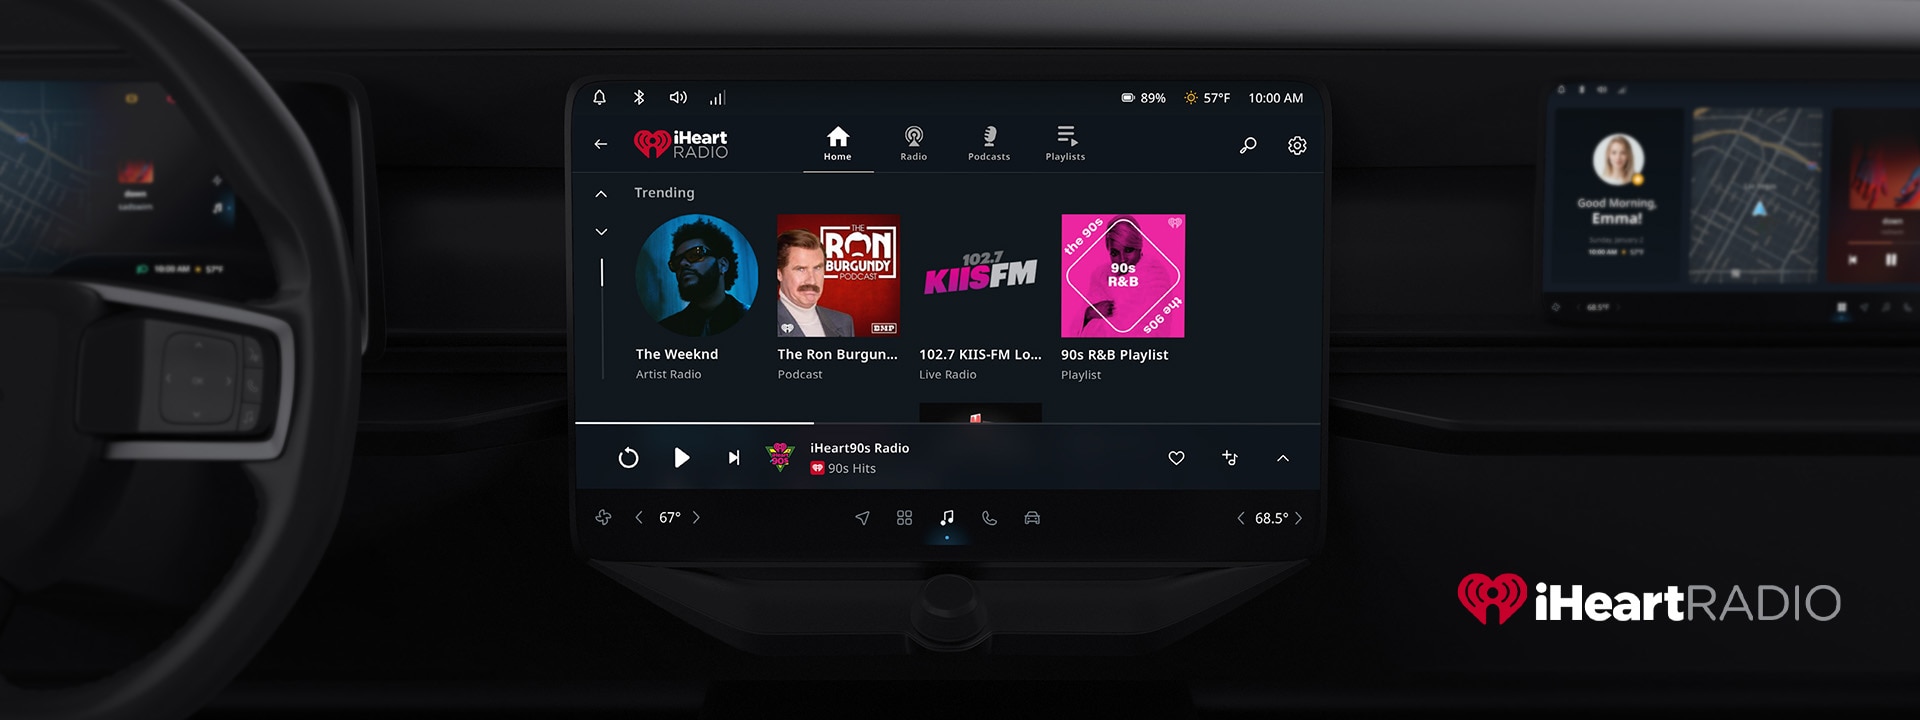 iHeartRadio and TomTom